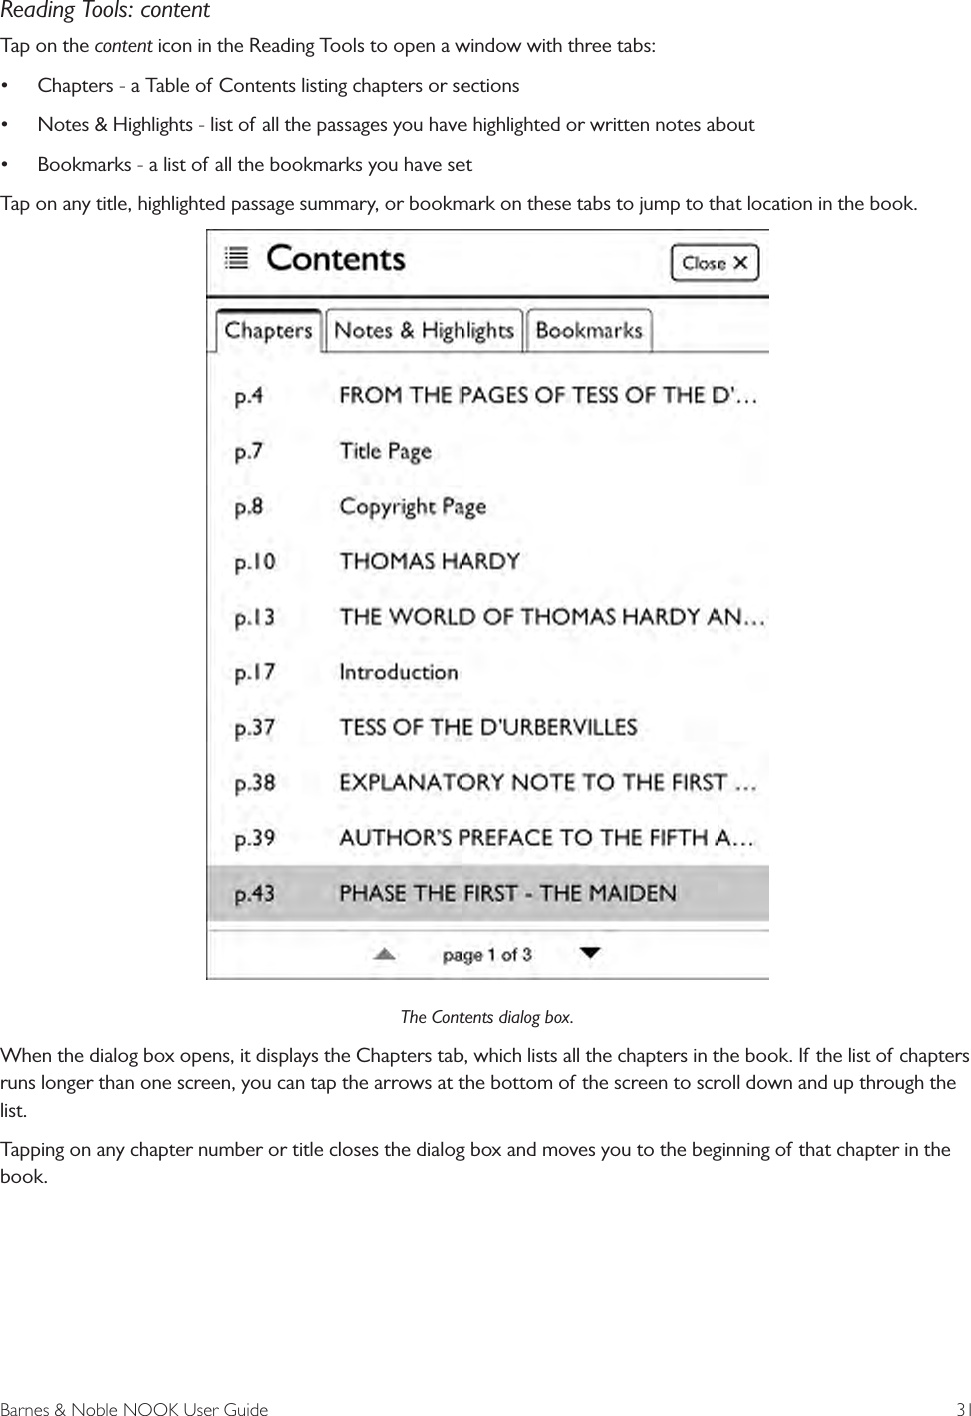 Barnes &amp; Noble NOOK User Guide  31Reading Tools: contentTap on the content icon in the Reading Tools to open a window with three tabs:• Chapters - a Table of Contents listing chapters or sections • Notes &amp; Highlights - list of all the passages you have highlighted or written notes about• Bookmarks - a list of all the bookmarks you have setTap on any title, highlighted passage summary, or bookmark on these tabs to jump to that location in the book.The Contents dialog box.When the dialog box opens, it displays the Chapters tab, which lists all the chapters in the book. If the list of chapters runs longer than one screen, you can tap the arrows at the bottom of the screen to scroll down and up through the list. Tapping on any chapter number or title closes the dialog box and moves you to the beginning of that chapter in the book.